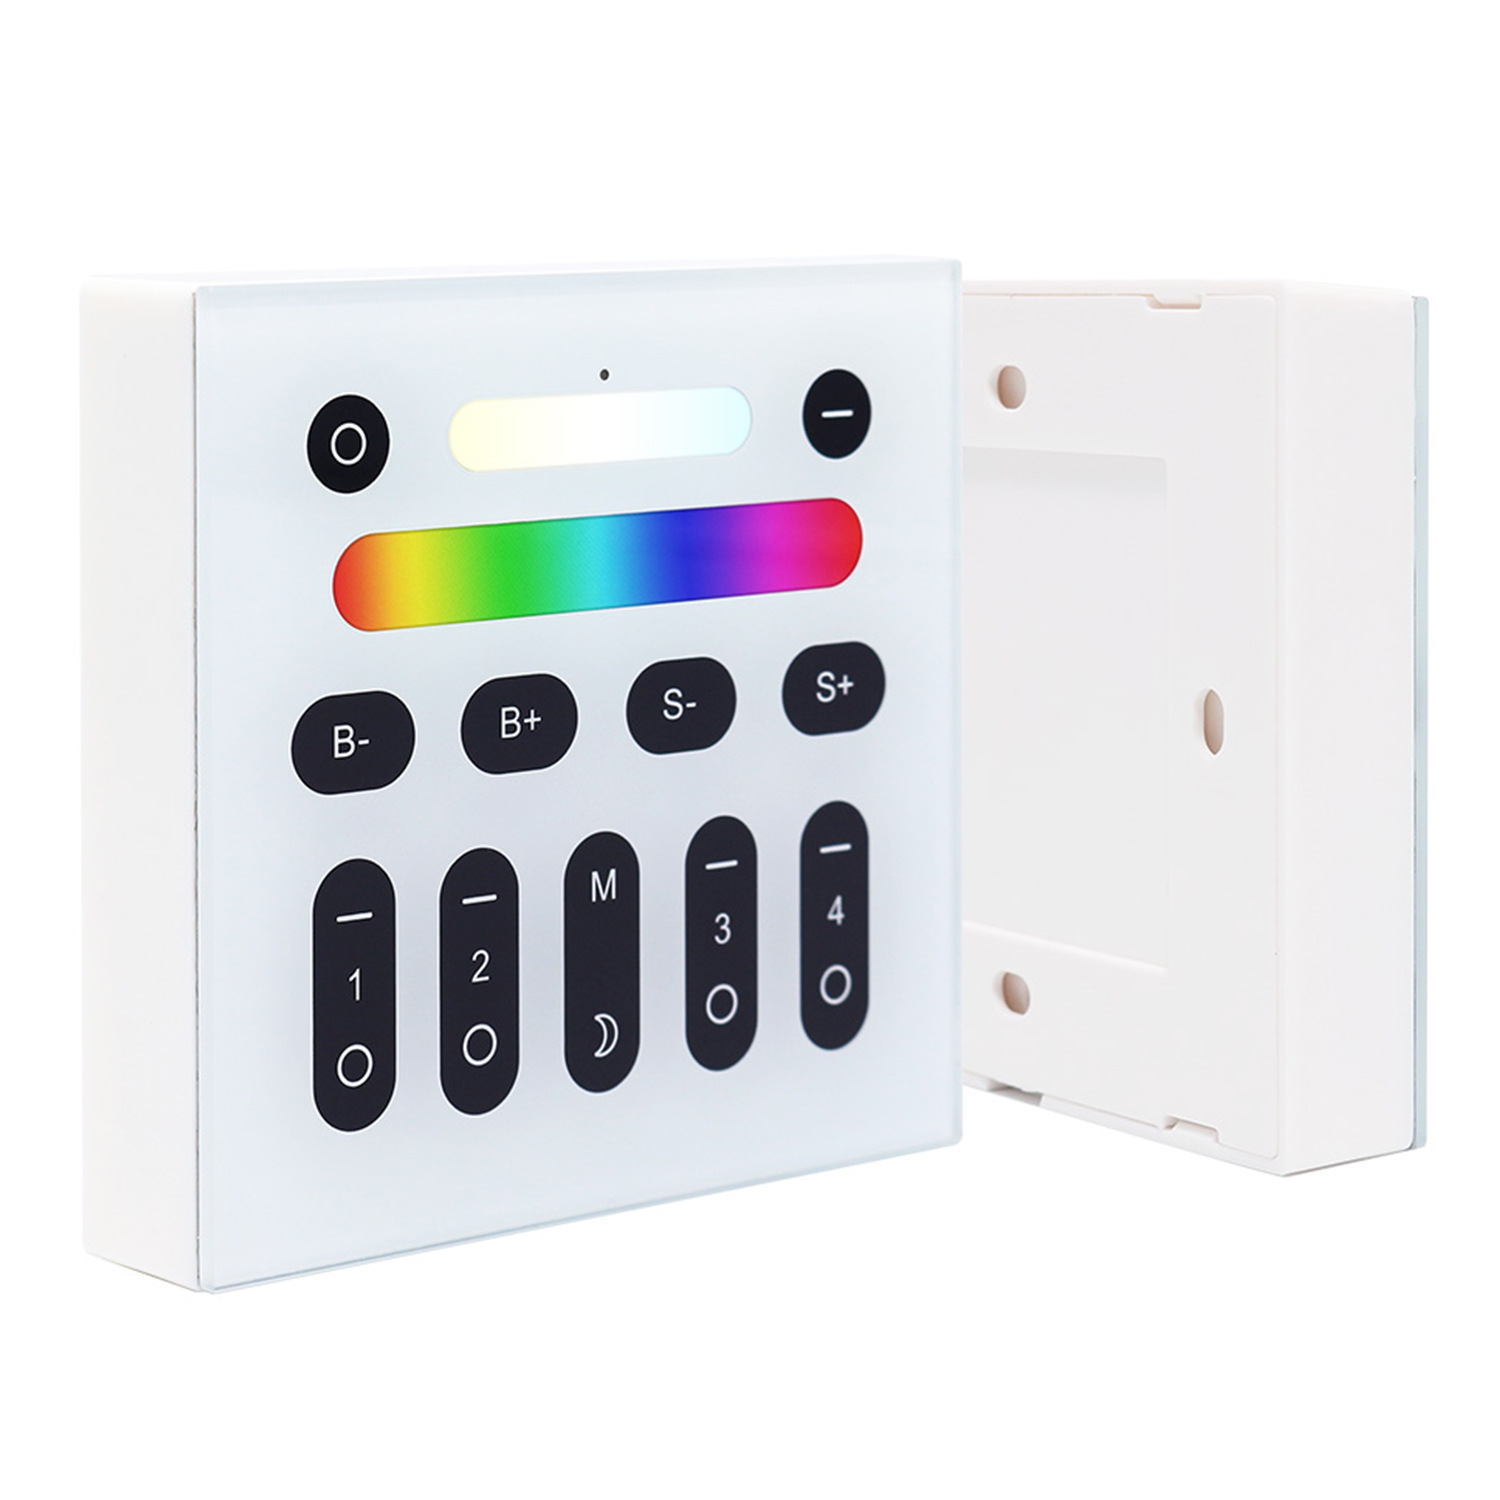 Wall mounted Led Panel Controller 4 Zone RF Dimmable dimmer remote RGB CCT RGBW 